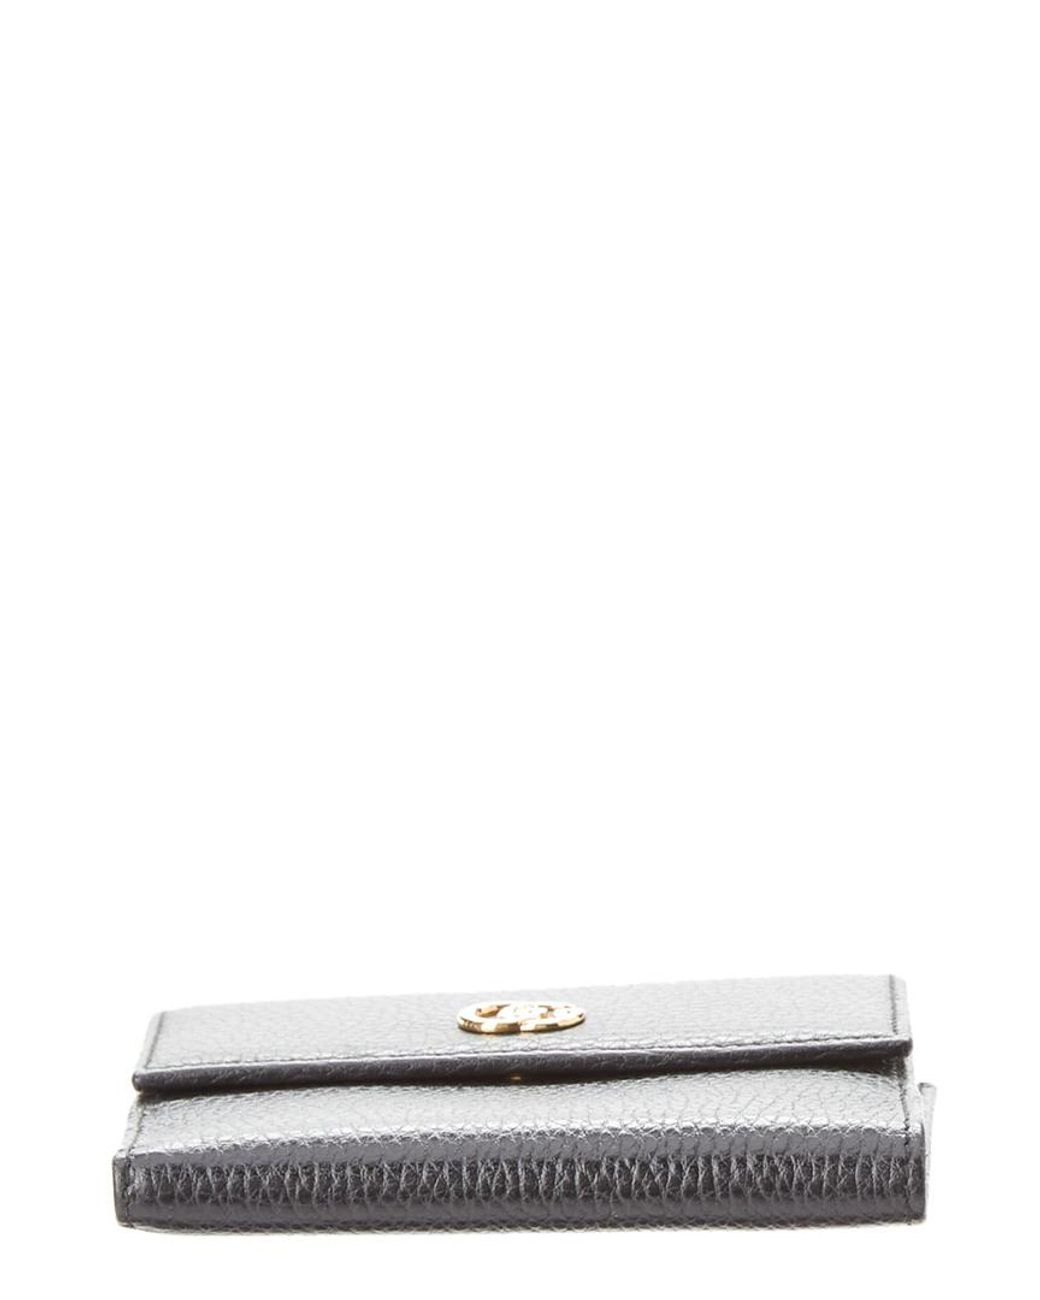 Gucci Leather French Flap Wallet in Black | Lyst